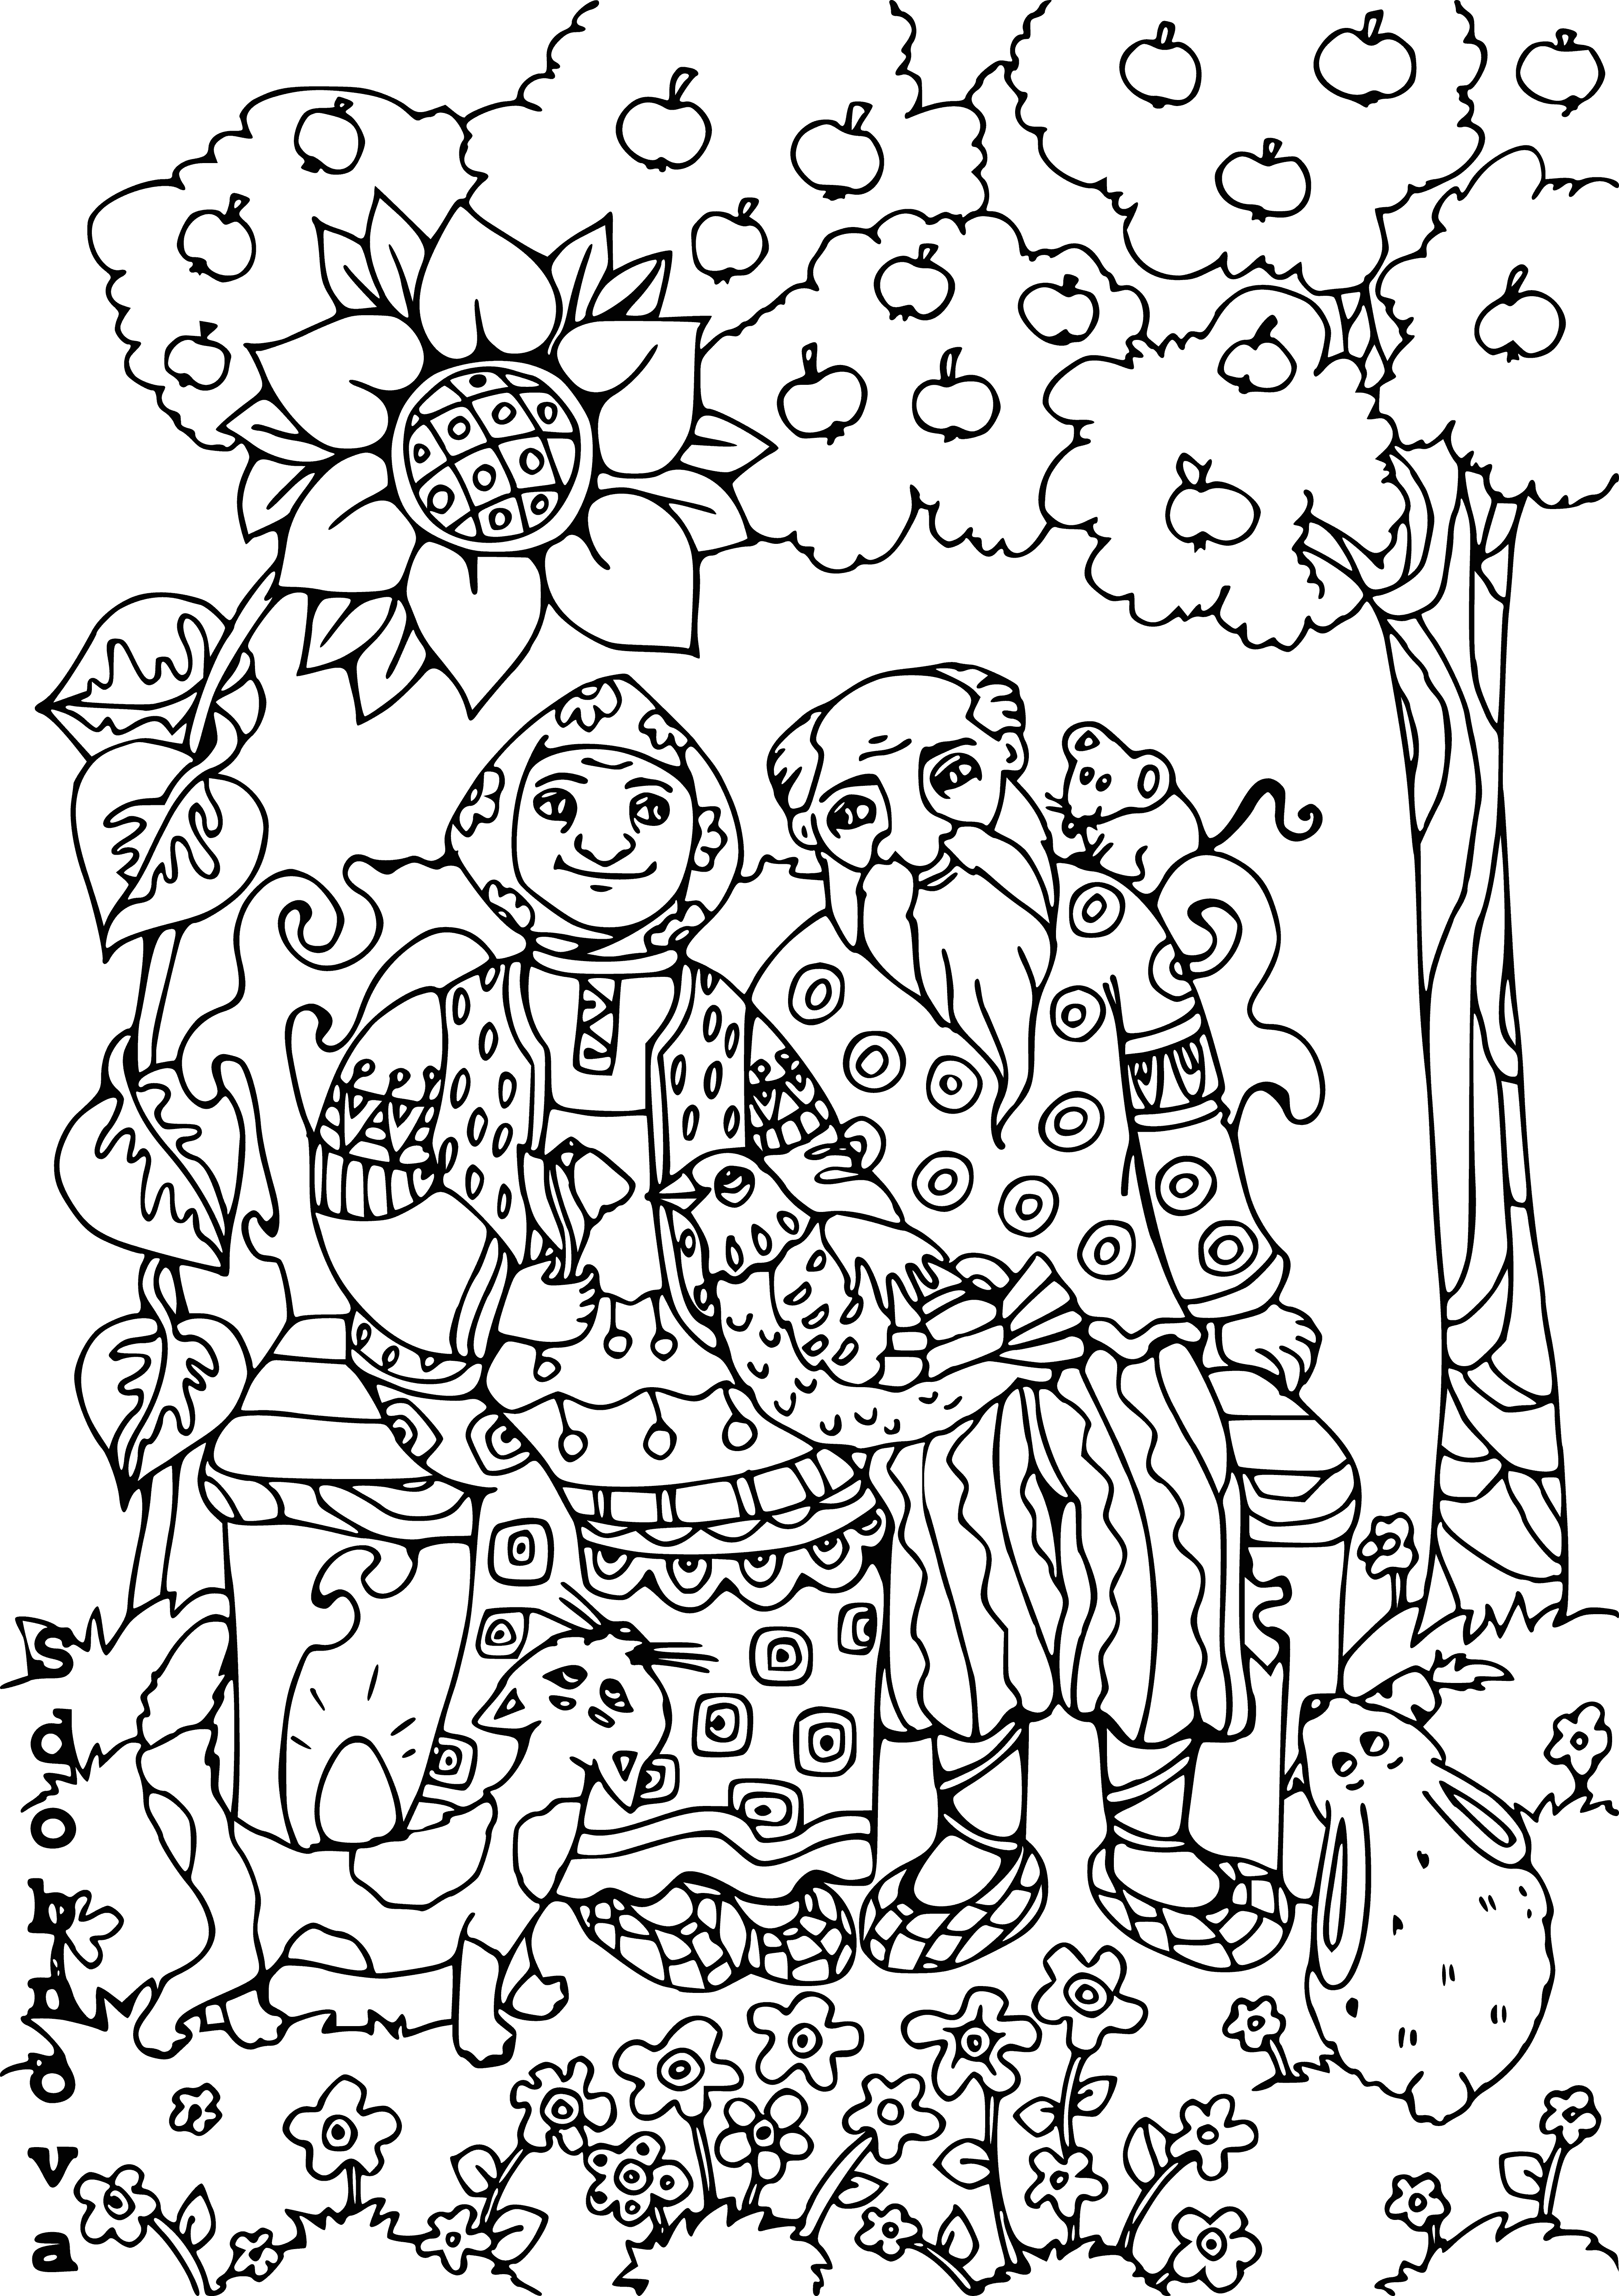 coloring page: Grandfather, grandmother & chicken are happy on a bench with the chicken speckled & running around.